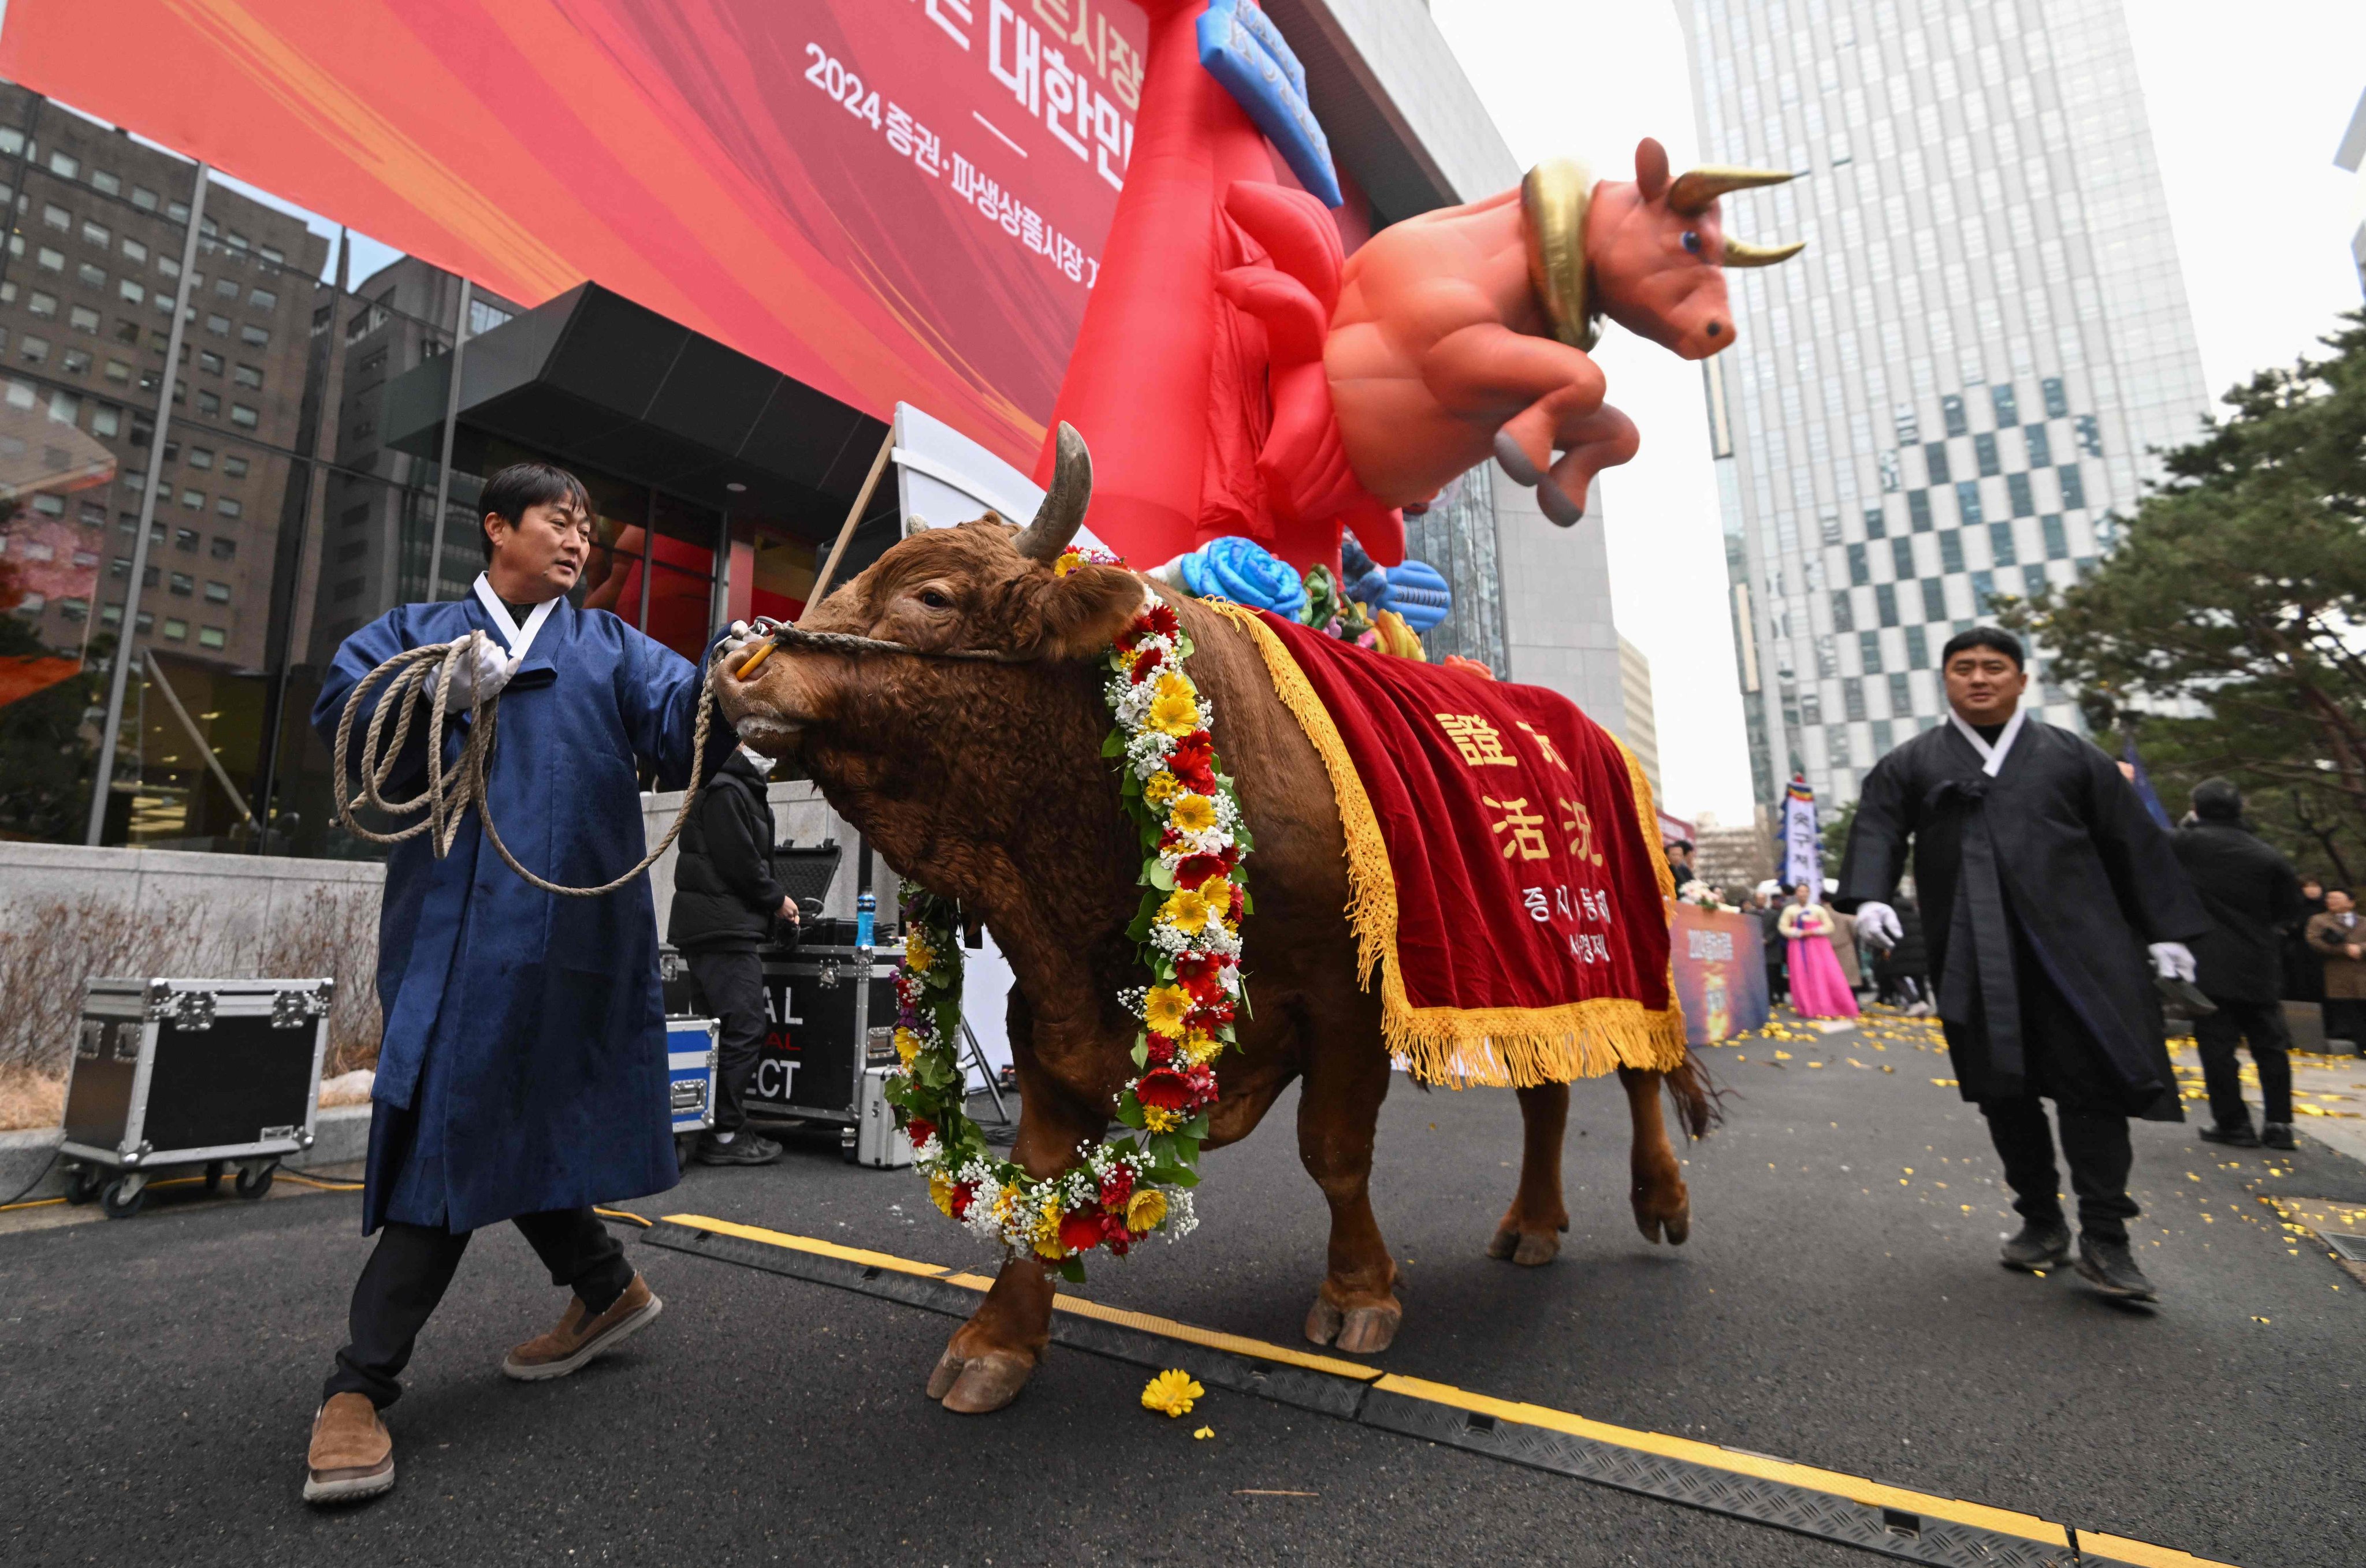 A man leads a bull during a ceremony celebrating the New Year’s opening of the South Korea stock market at the Korea Exchange in Seoul on January 2. Photo: AFP